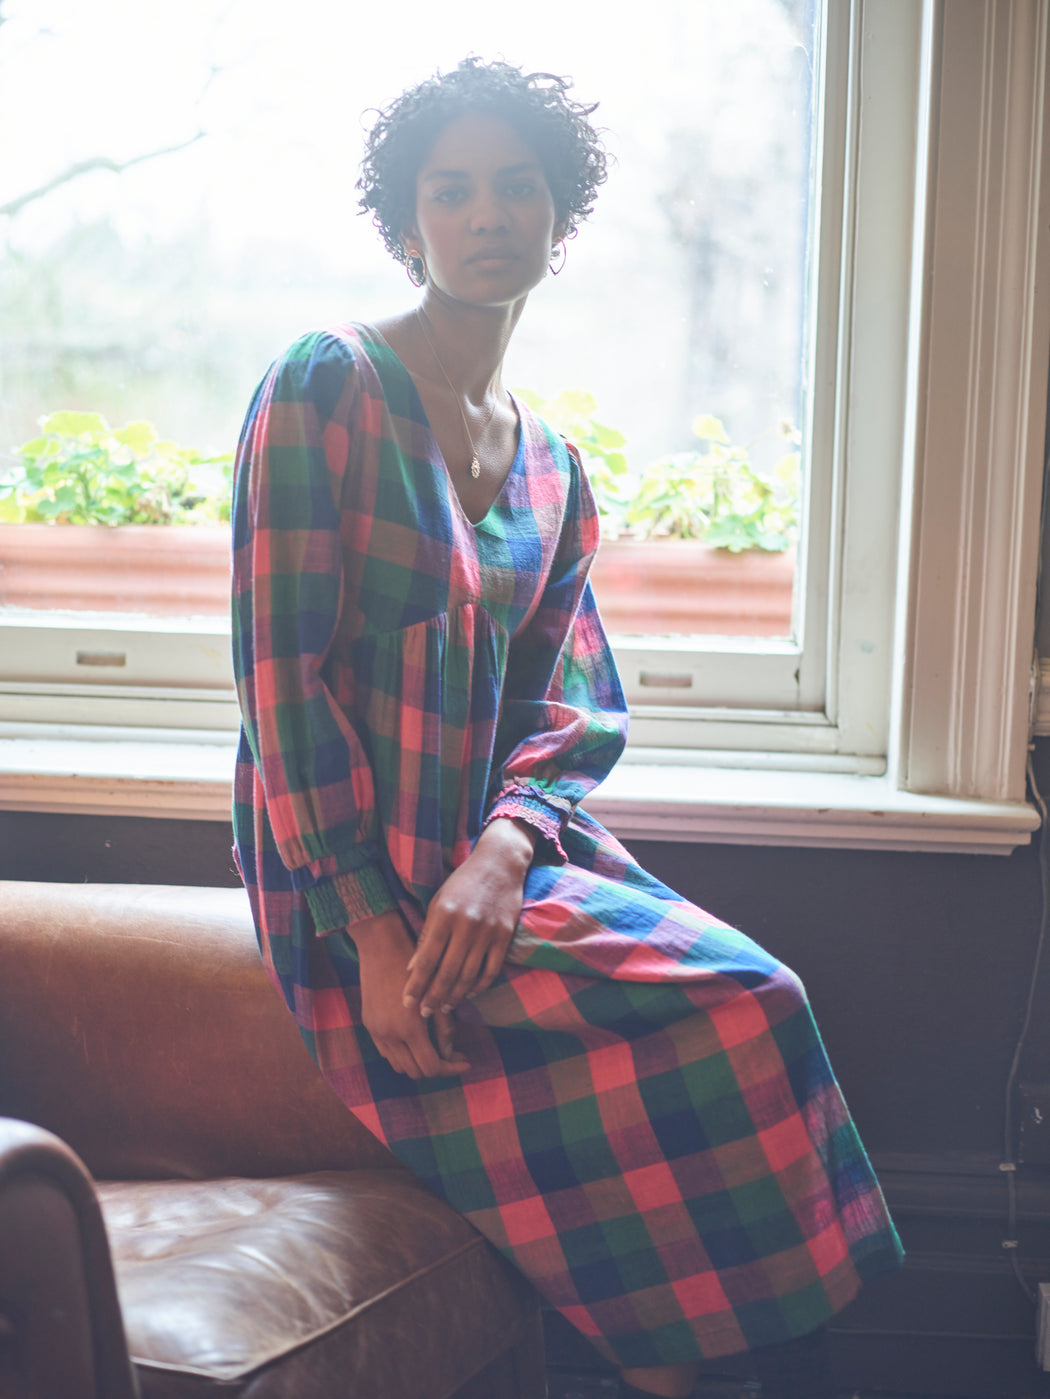 Lowie Handwoven Madras Check Dress